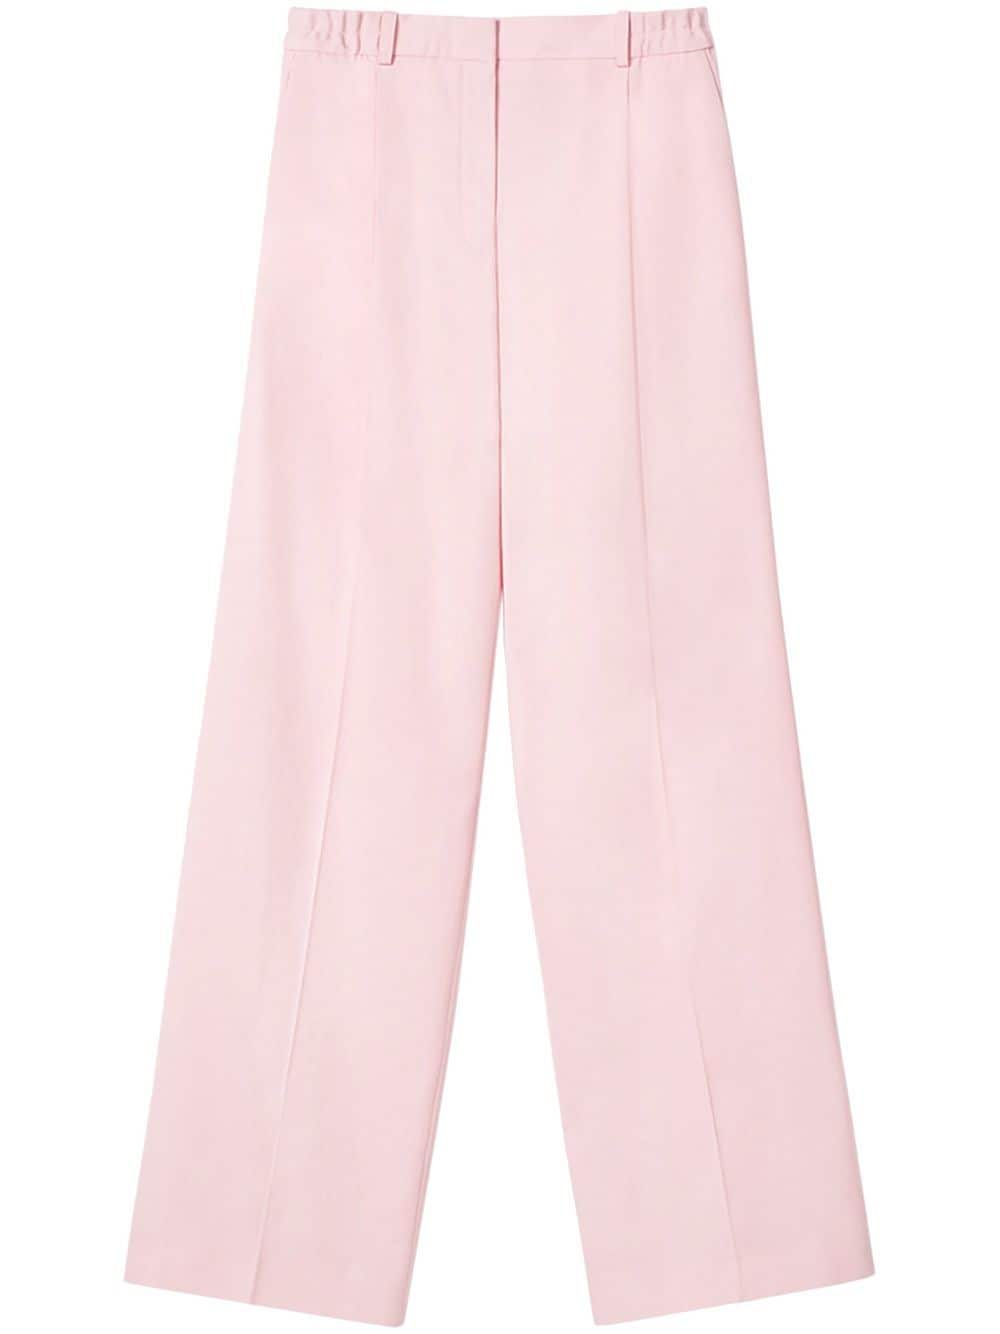 Nina Ricci Pressed Crease Tailored Trousers In Pink